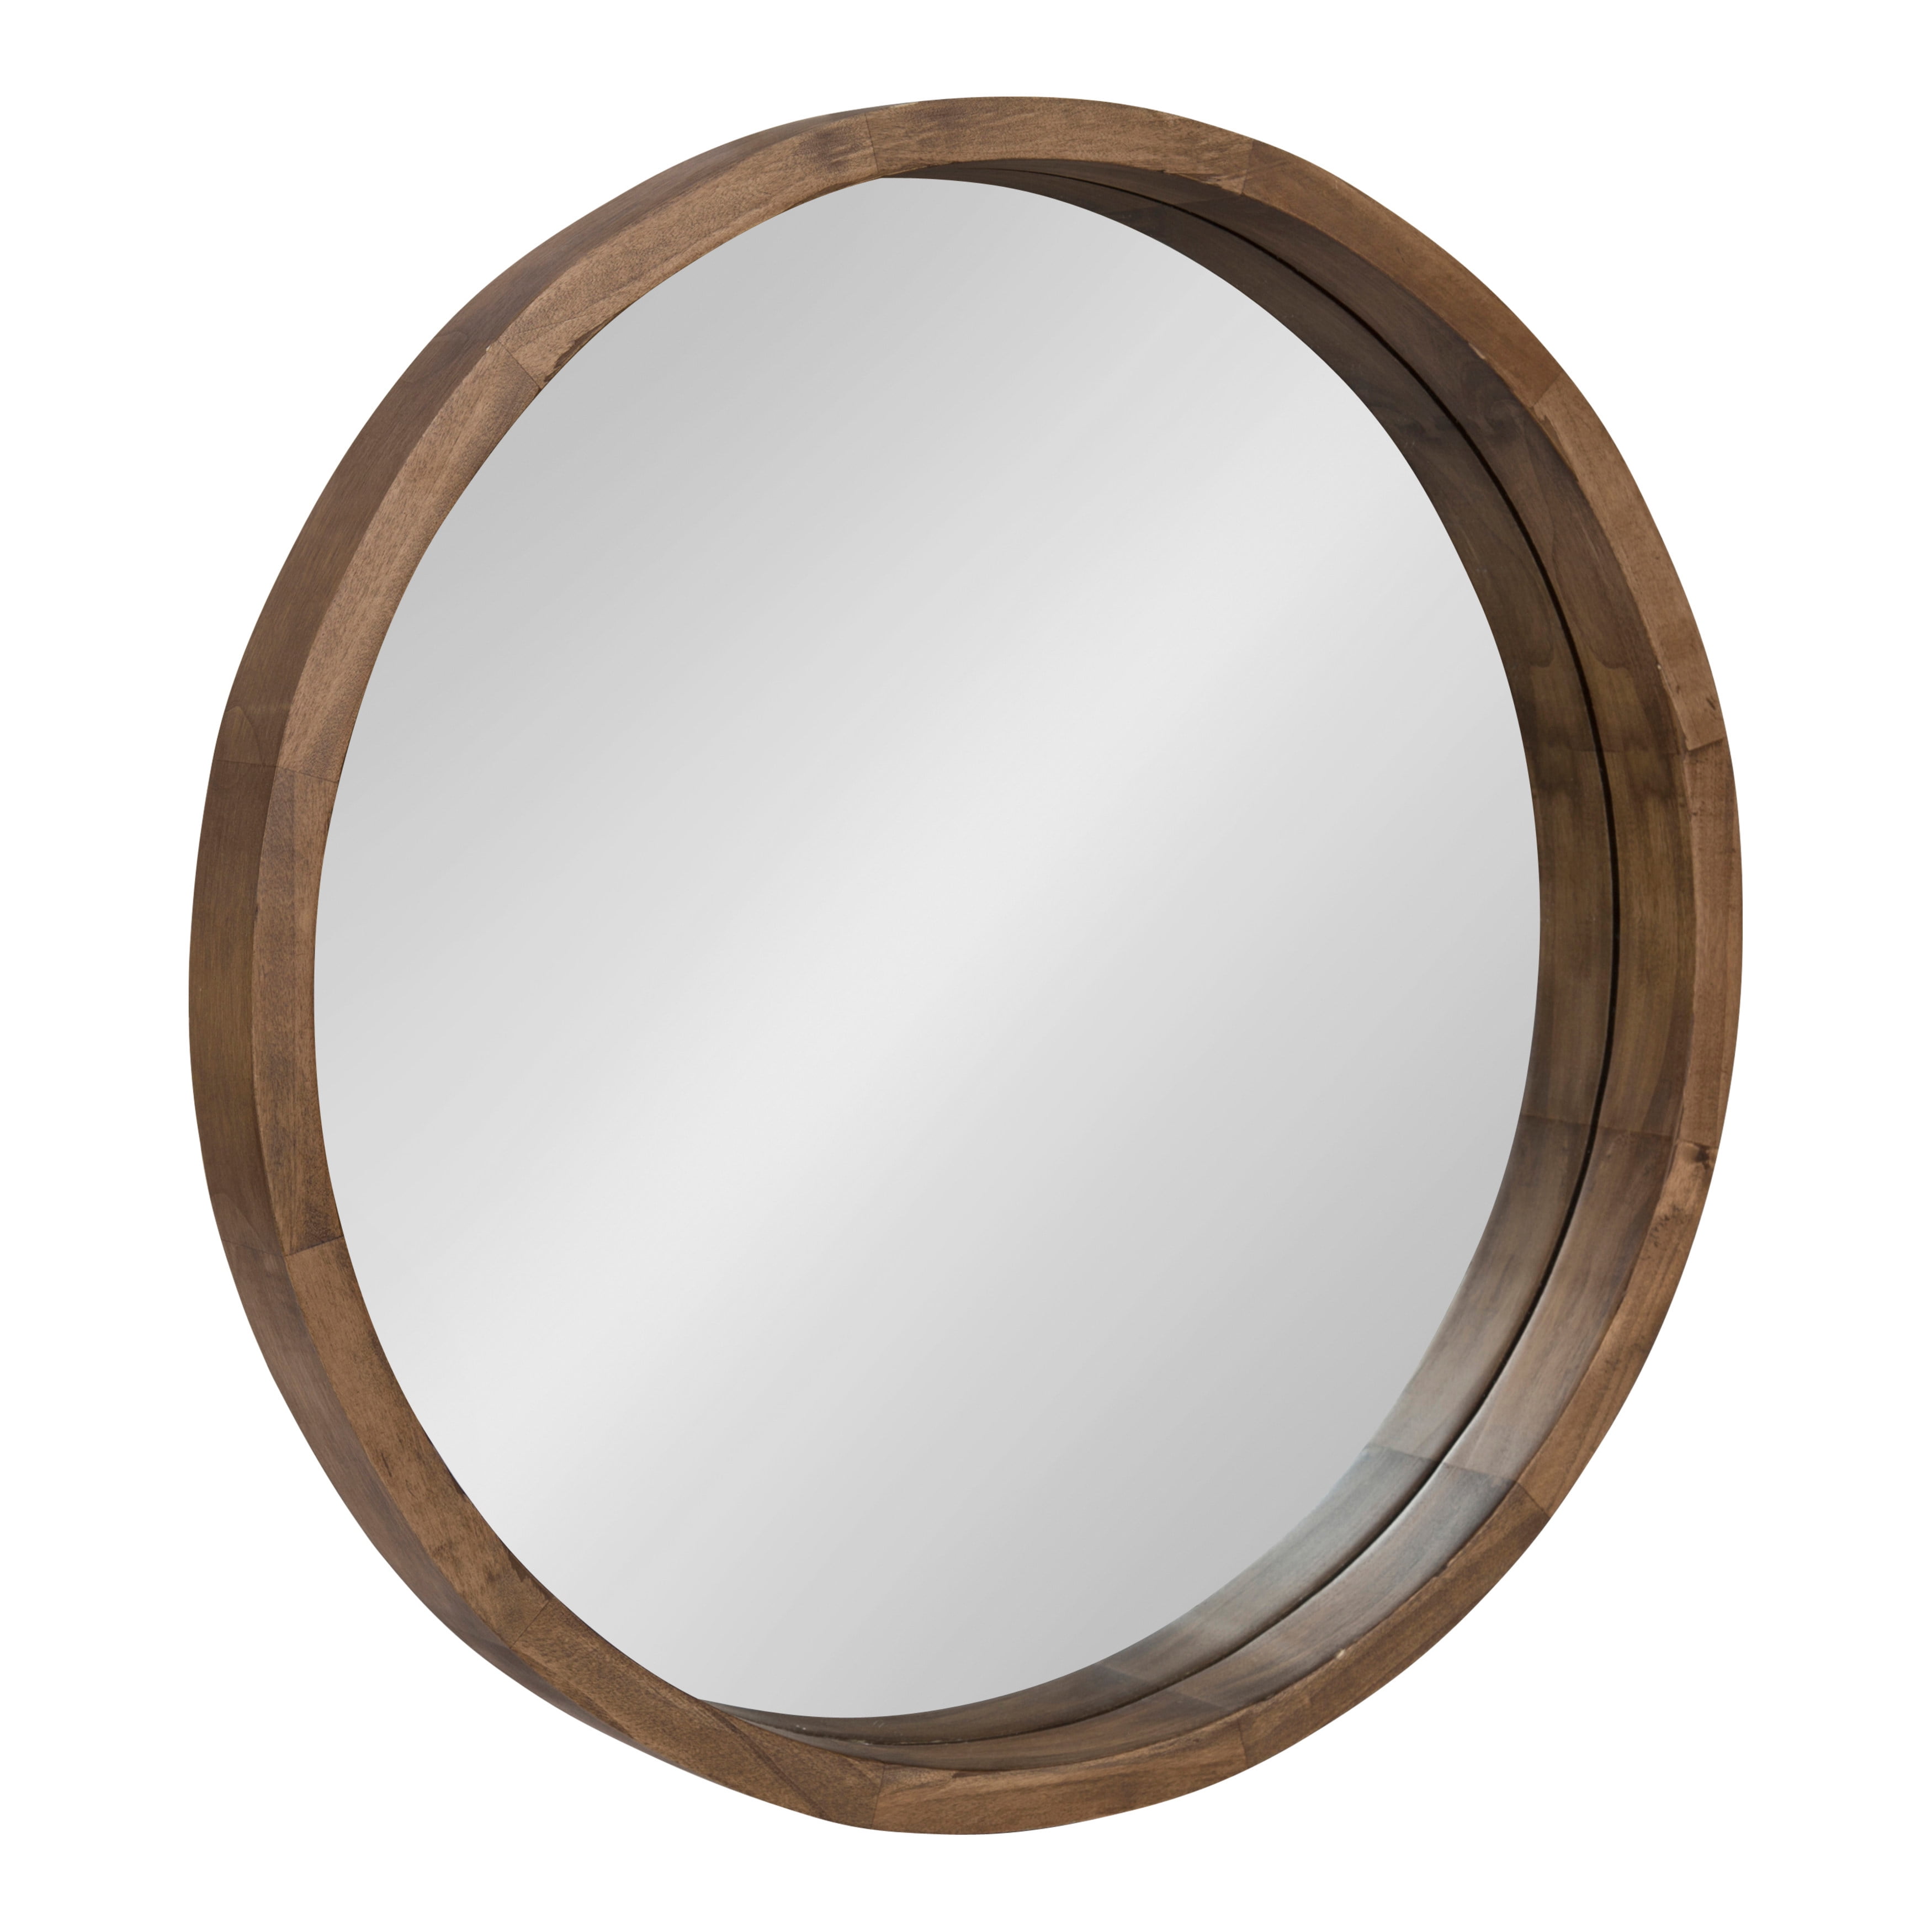 Natural Wood Round Wall Mirror, Round Mirror With Natural Wood Frame